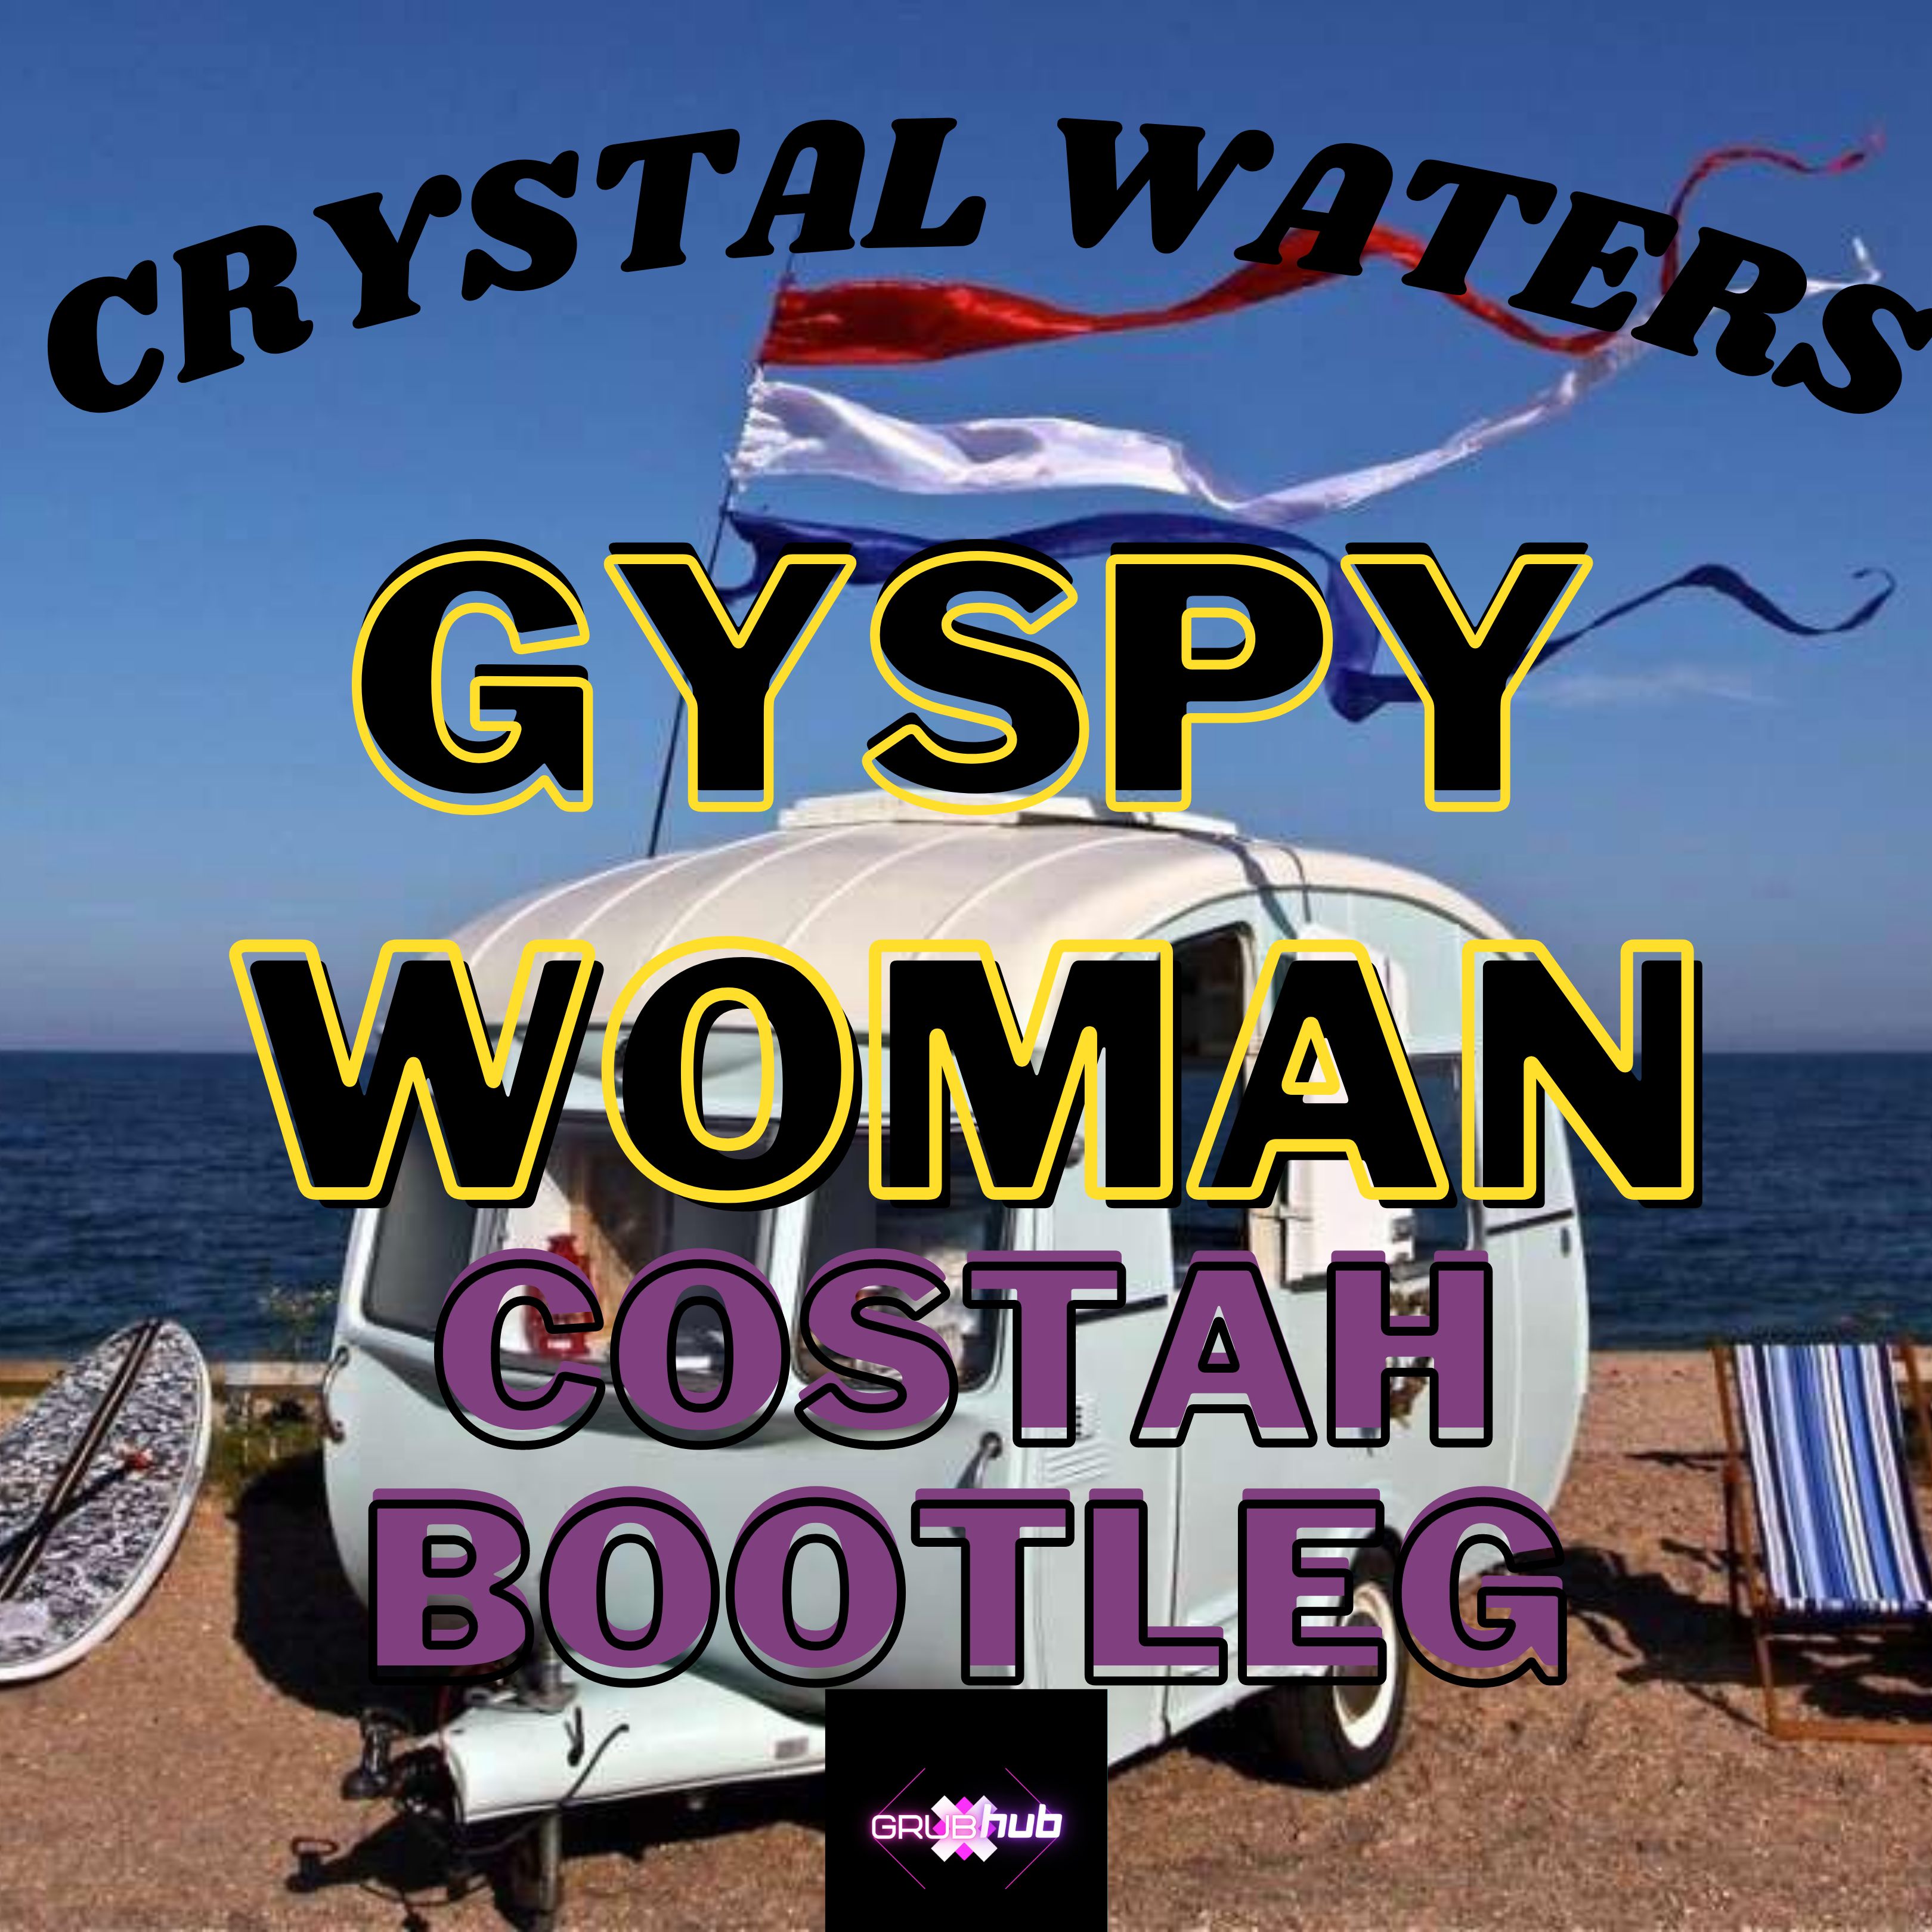 Télécharger Crystal Waters - Gypsy Woman (Costah Bootleg) FREE DOWNLOAD